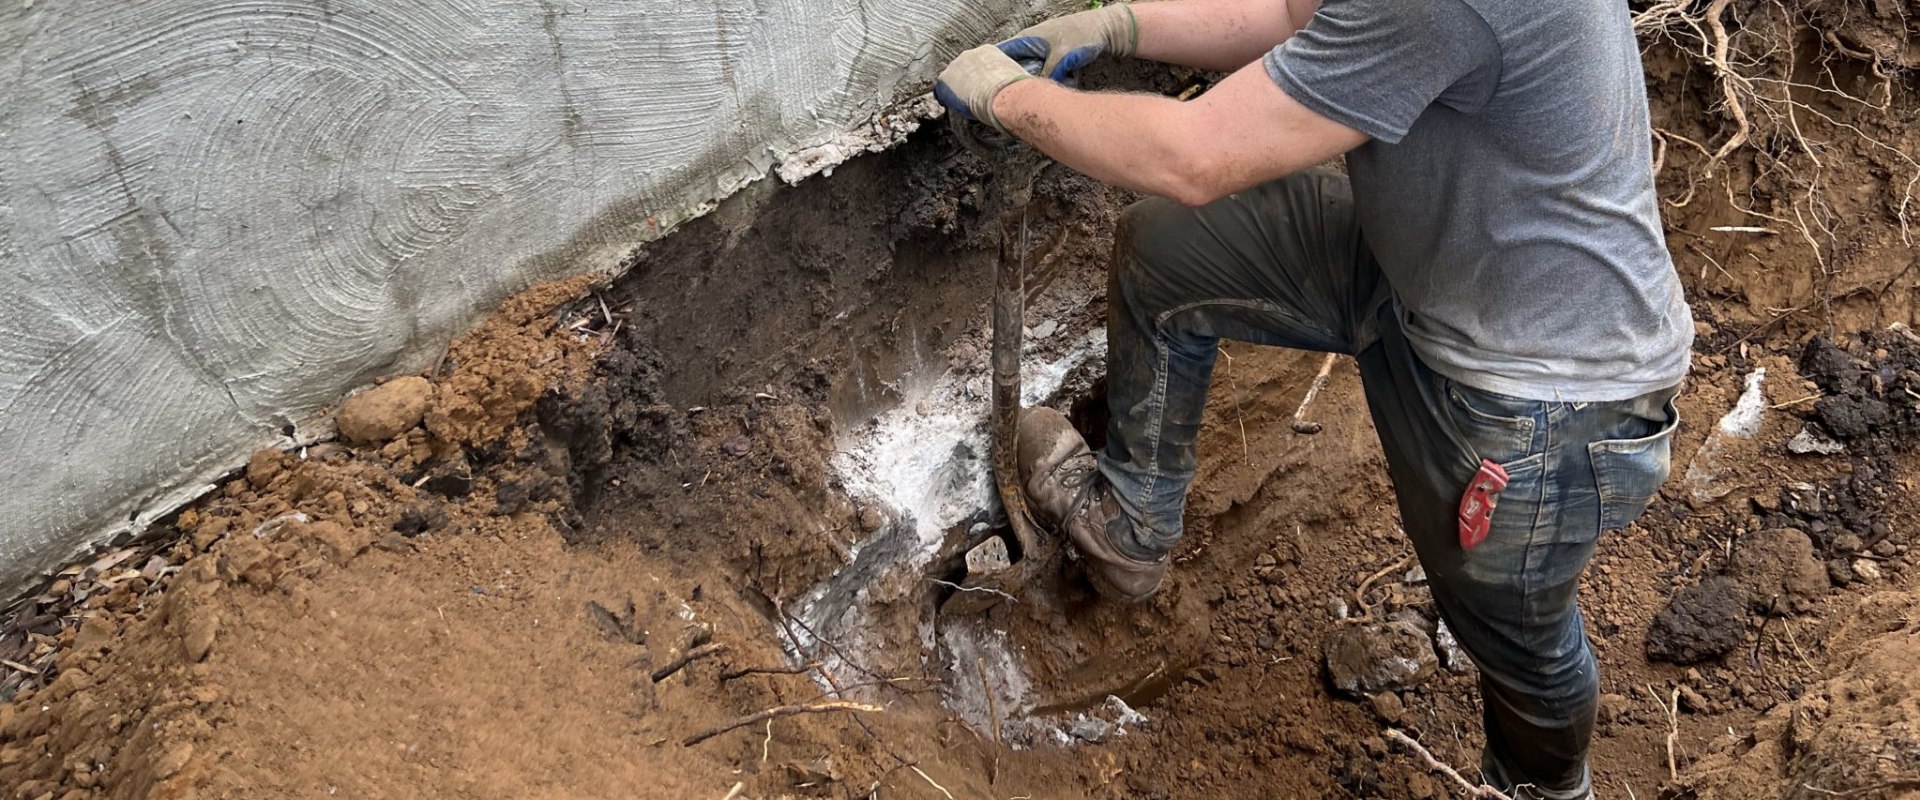 Foundation Repair Services in TN: What Methods Are Used?